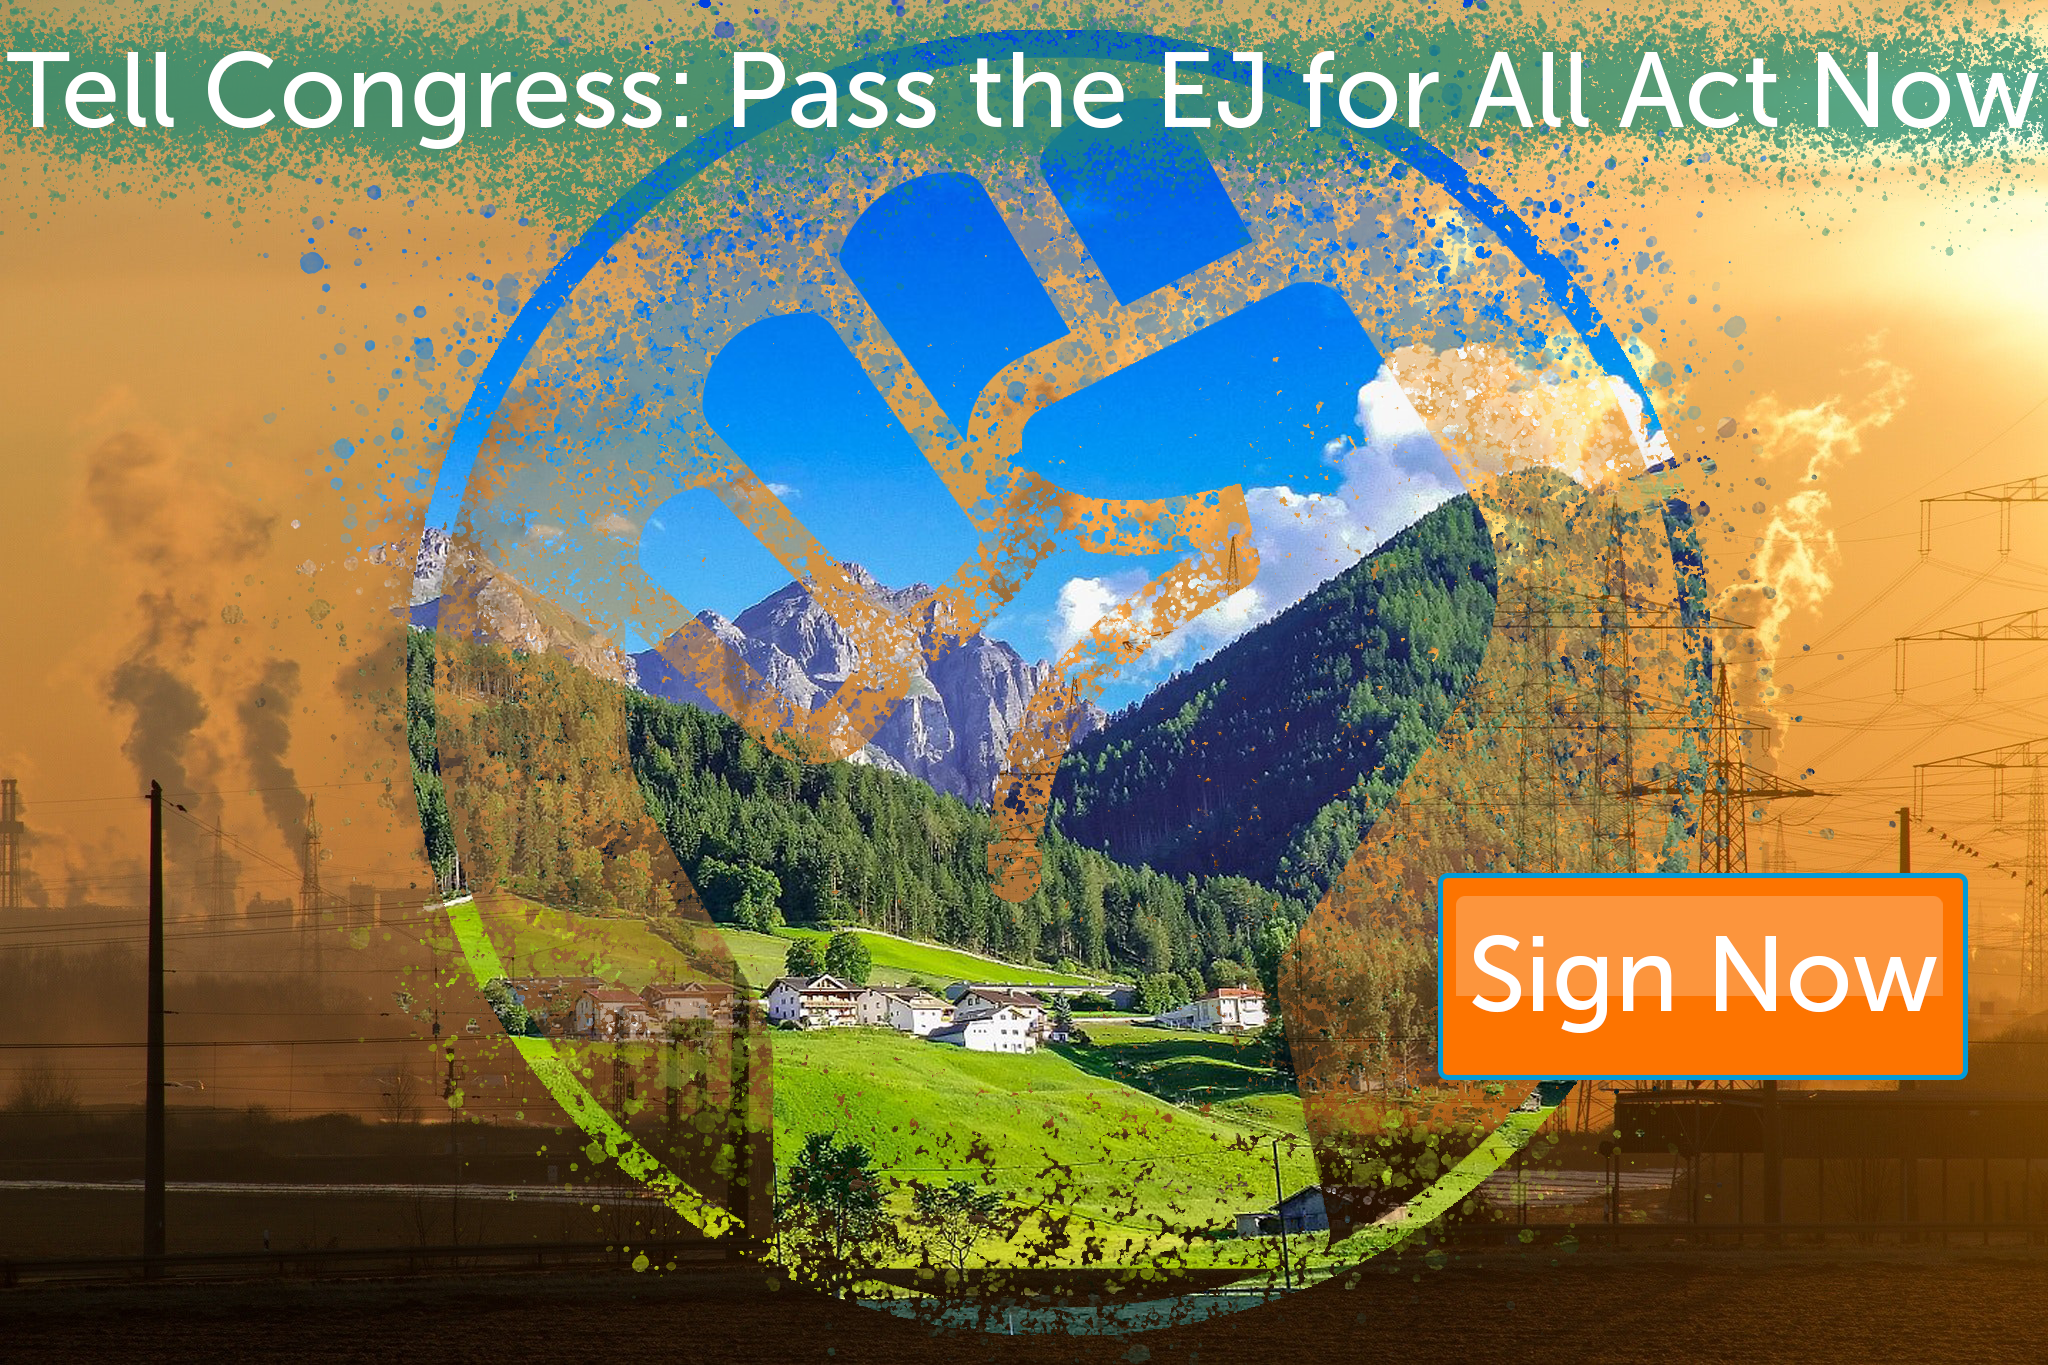 Tell Congress: pass the EJ for All Act Now. Sign now.